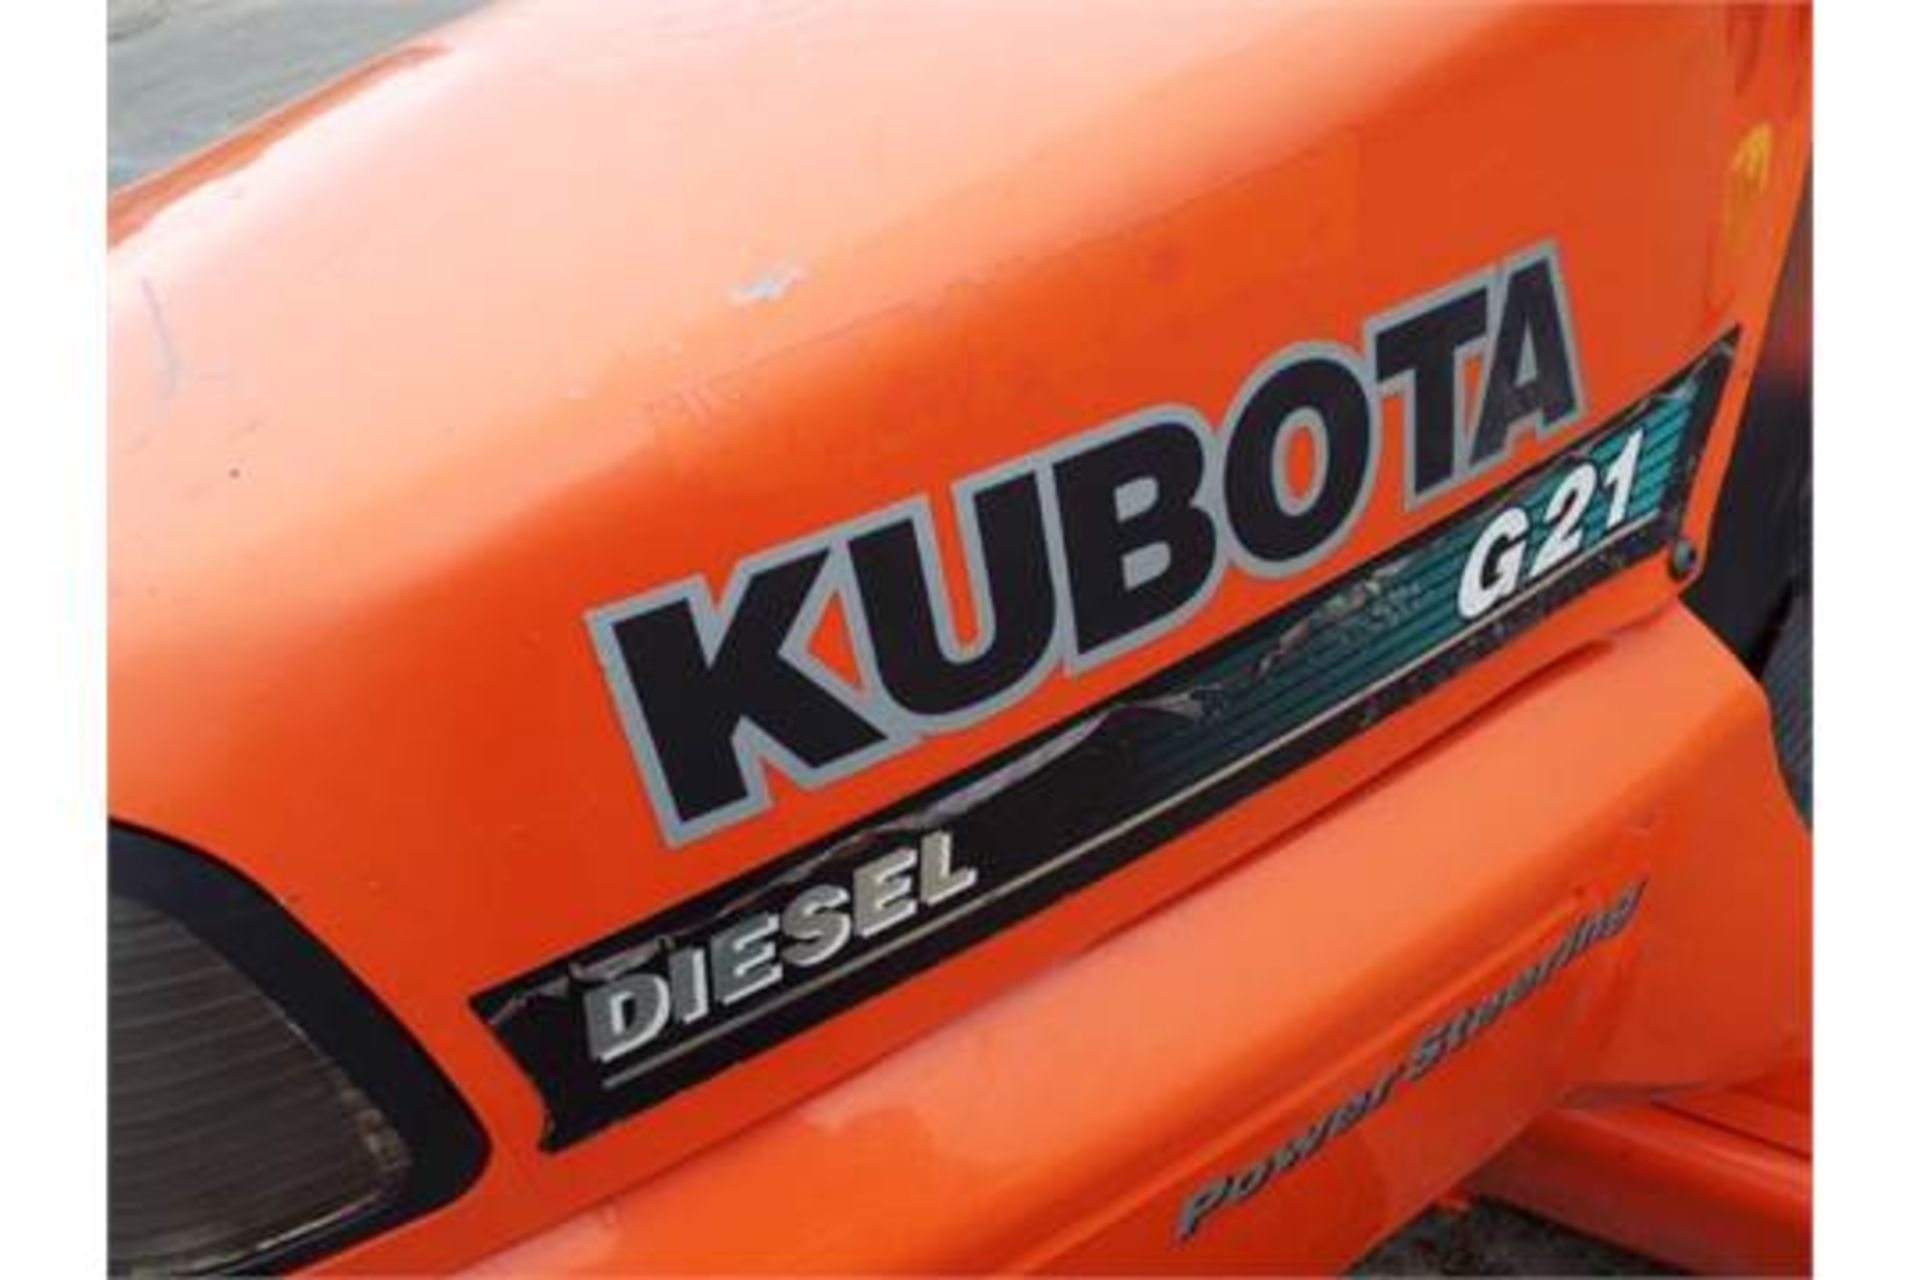 2008 Kubota G21 Ride On Mower with Glide-Cut System and High Dump Grass Collector - Image 22 of 22